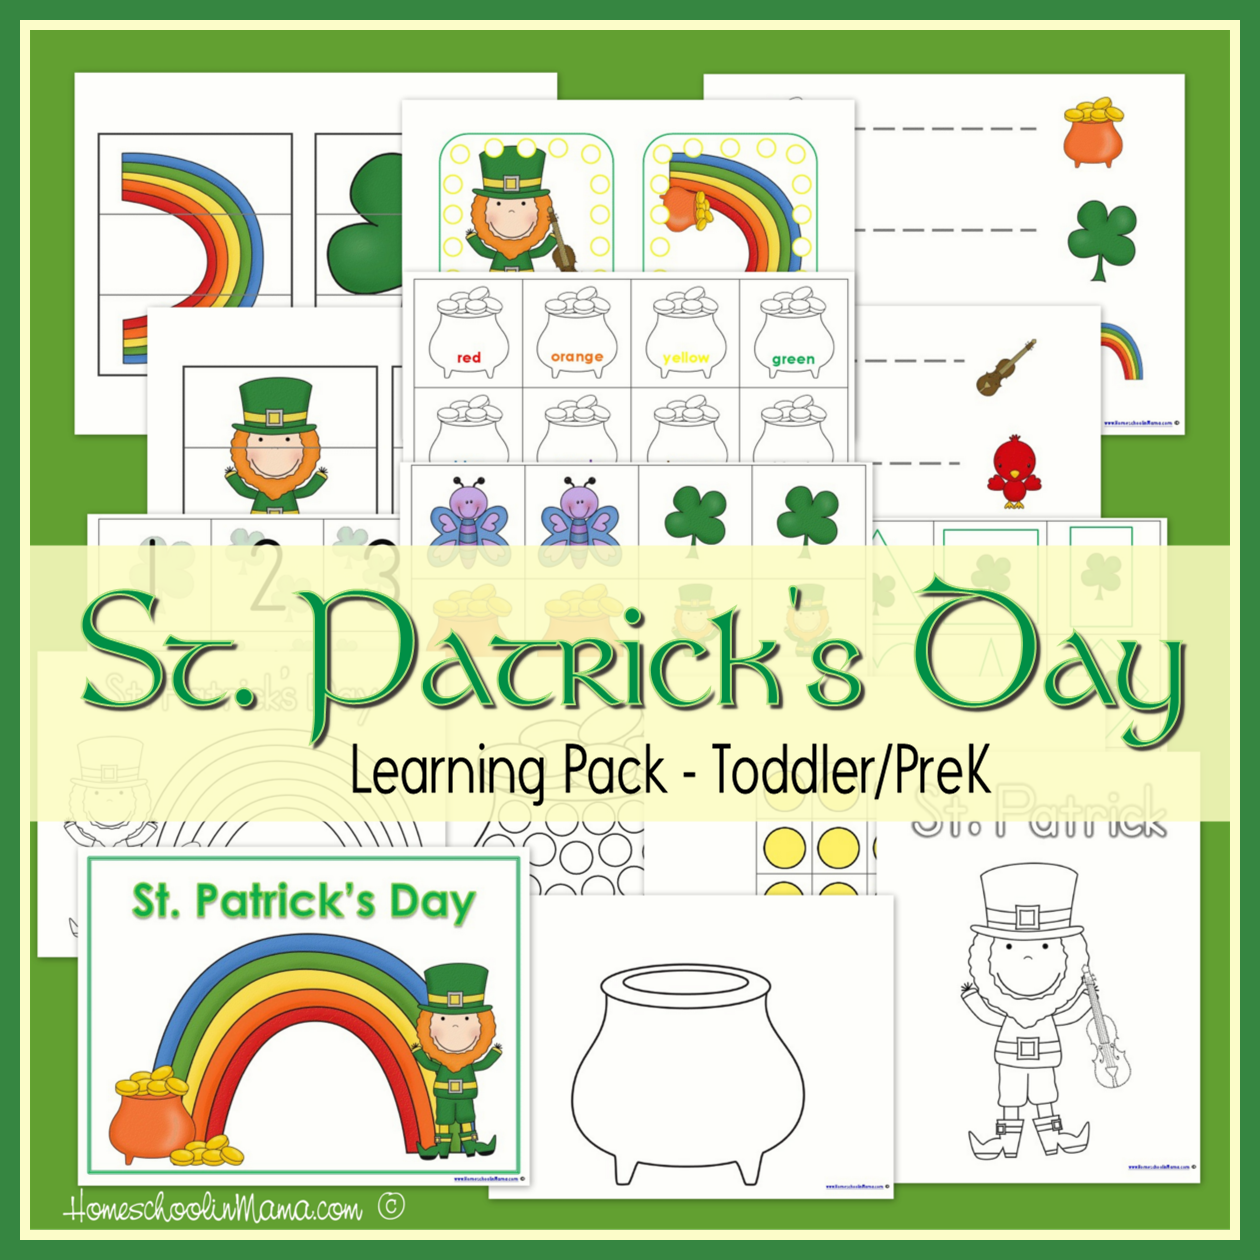 St. Patrick’s Day Learning Packs